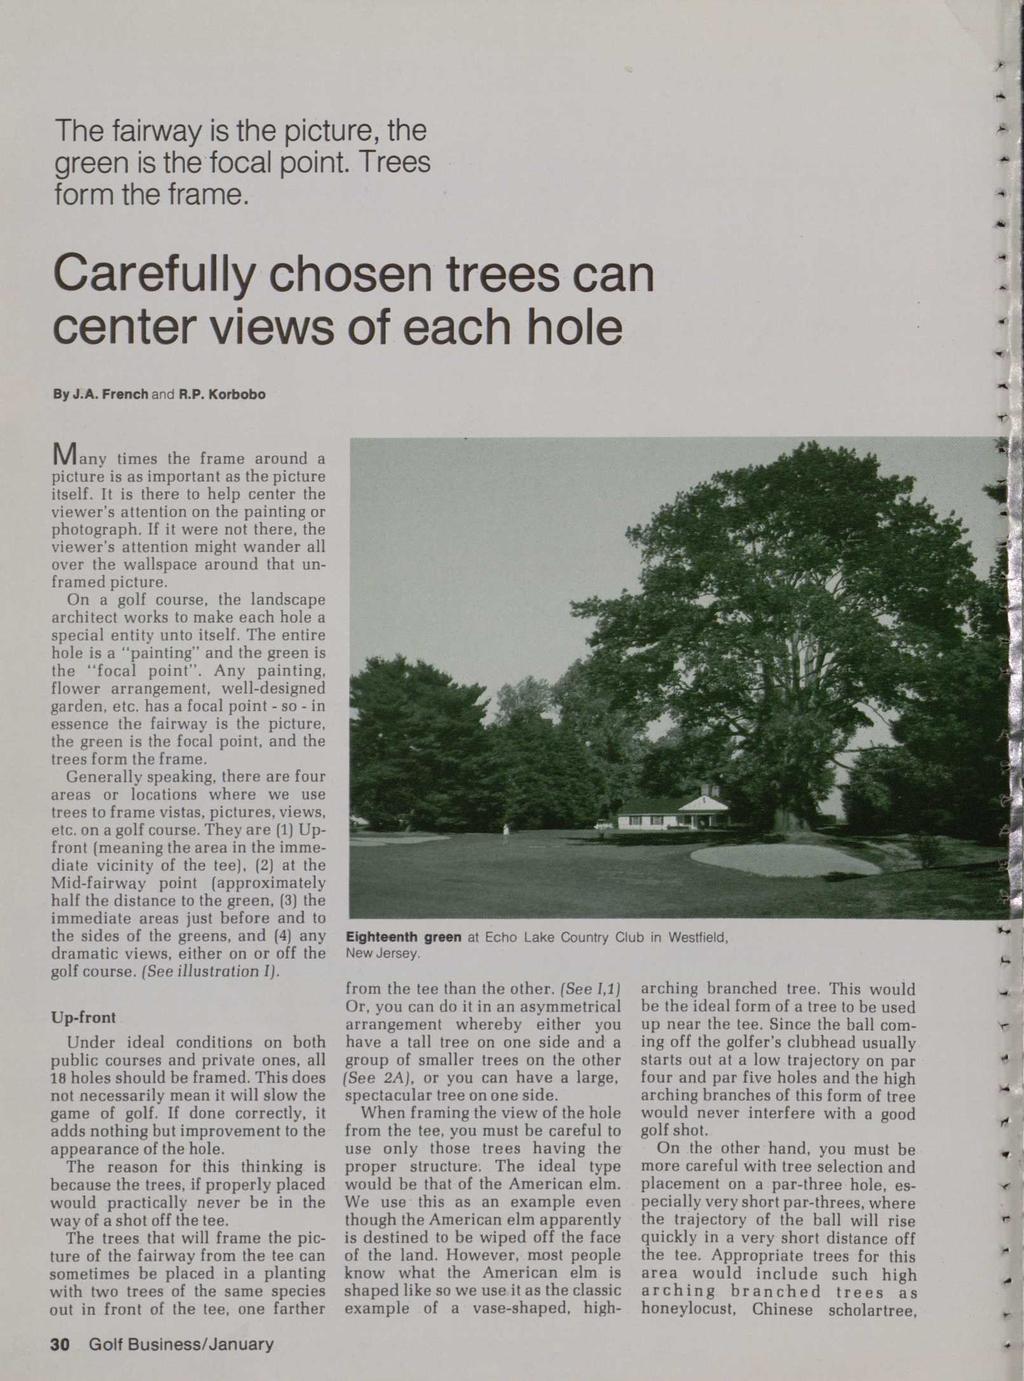 The fairway is the picture, the green is the focal point. Trees form the frame. Carefully chosen trees can center views of each hole By J.A. French and R.P.